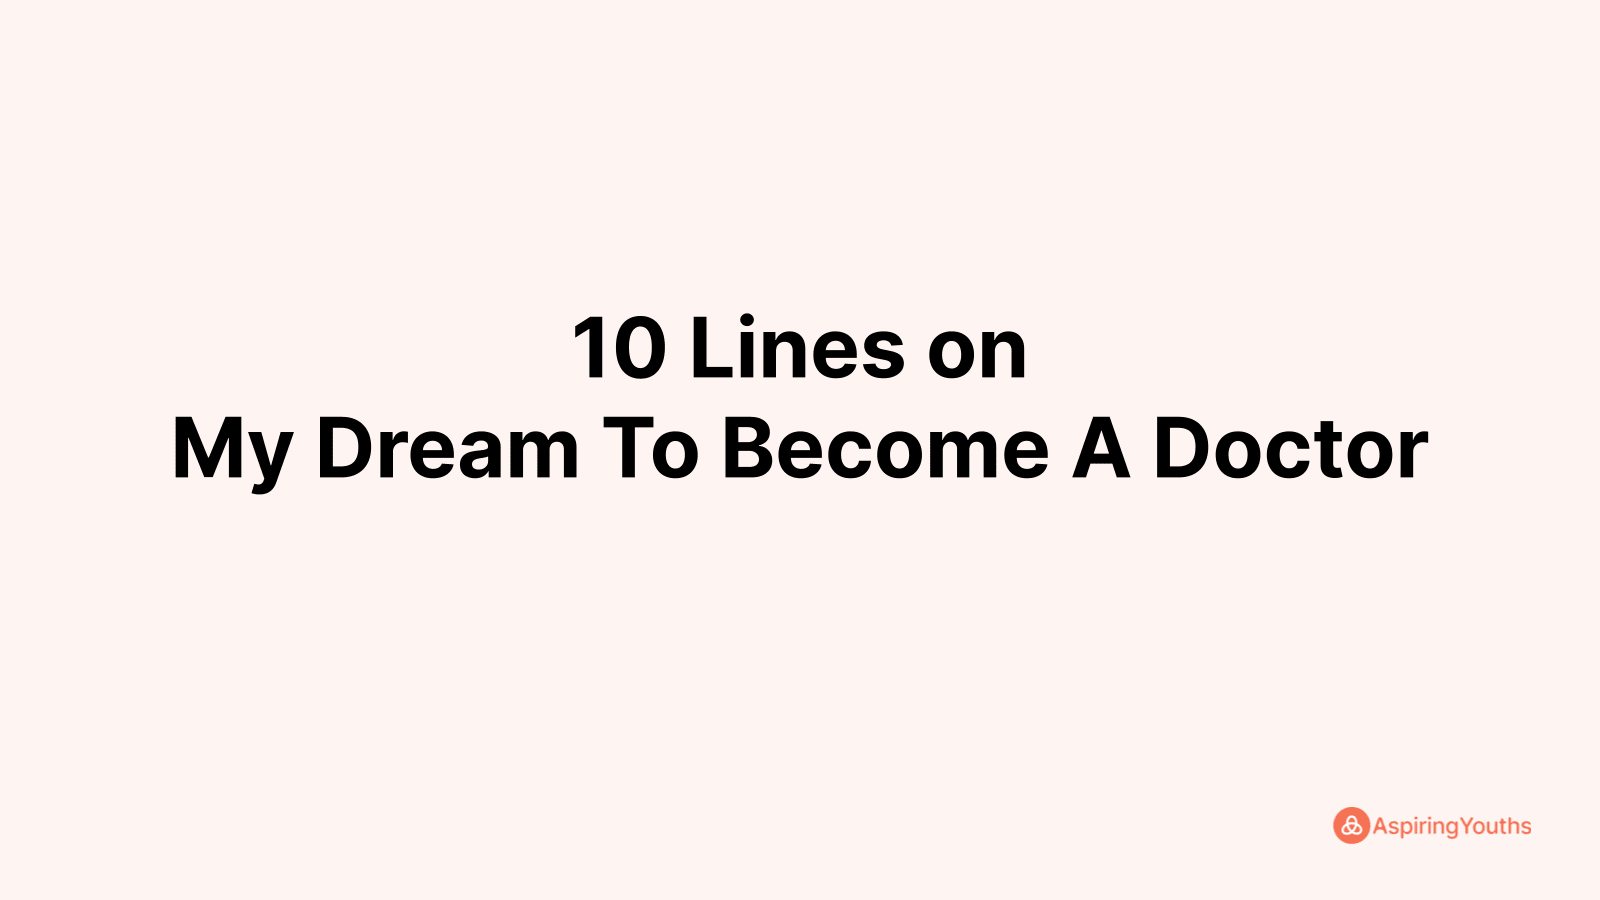 Write 10 Lines on My Dream To Become A Doctor